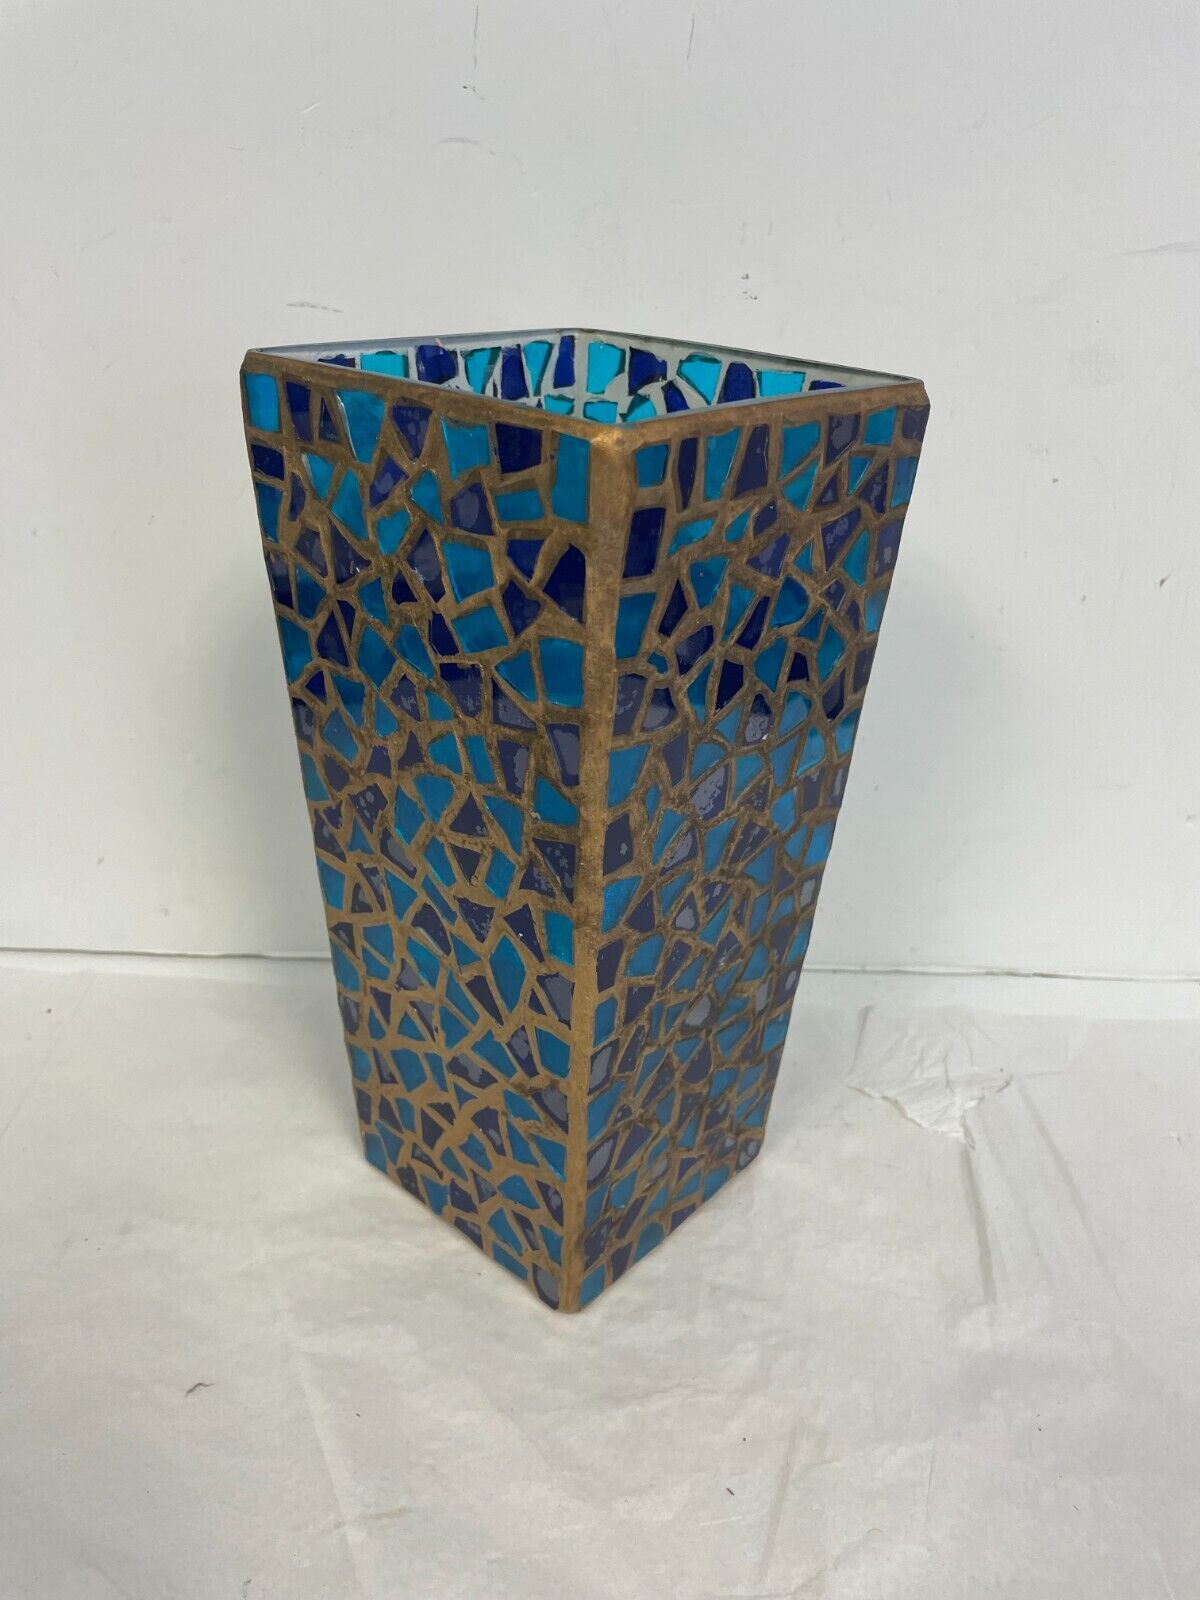 Vintage Mosaic Stained Glass Vase 10” x 5